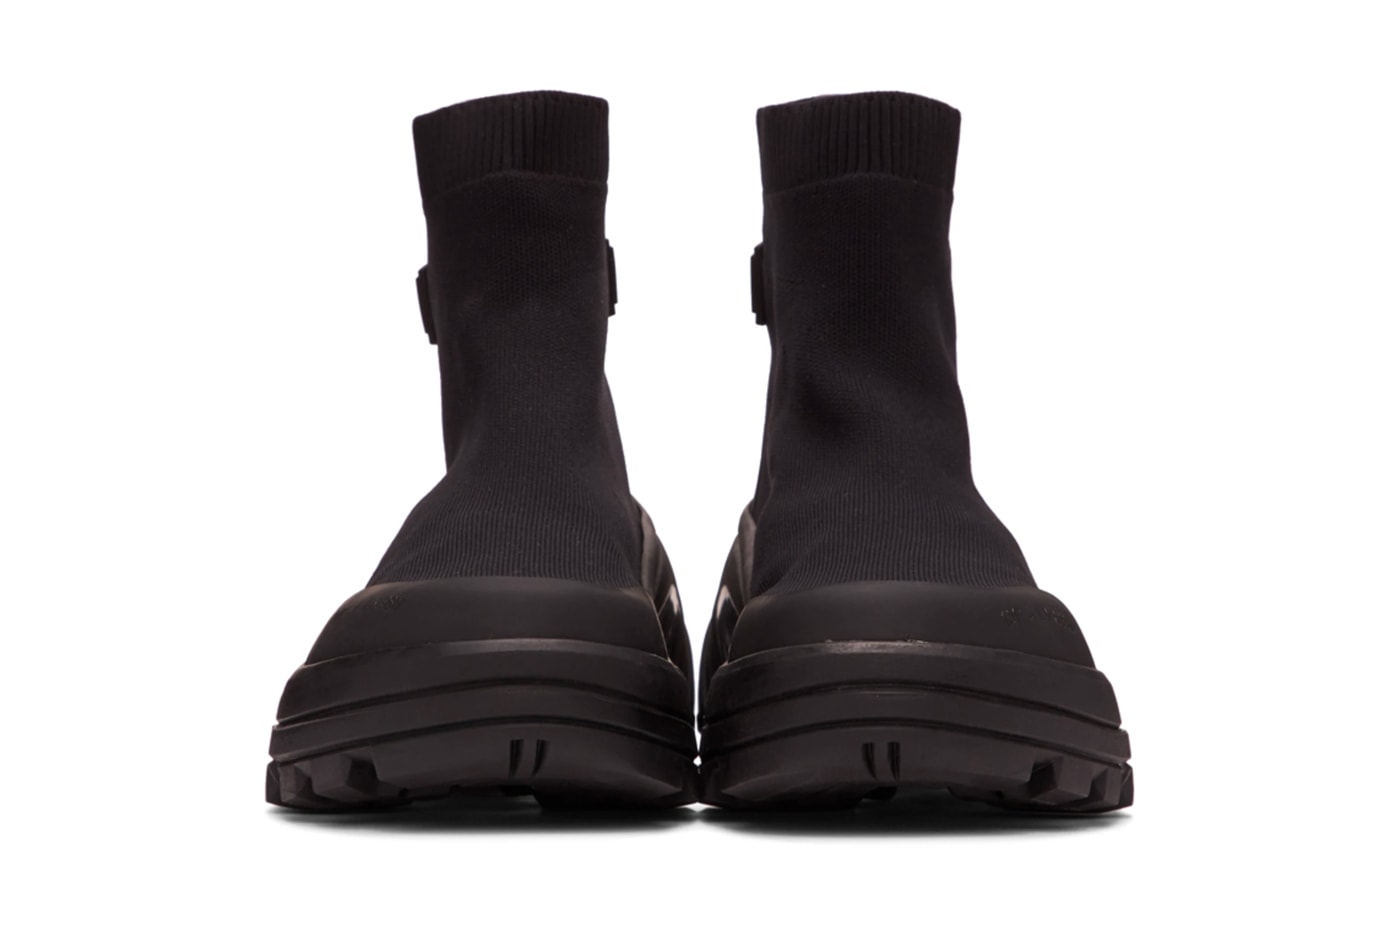 1017 ALYX 9SM Black Mid Sock Boots menswear streetwear shoes sneakers footwear spring summer 2020 collection matthew m williams trainers runners Made in Italy nlyon calfskin